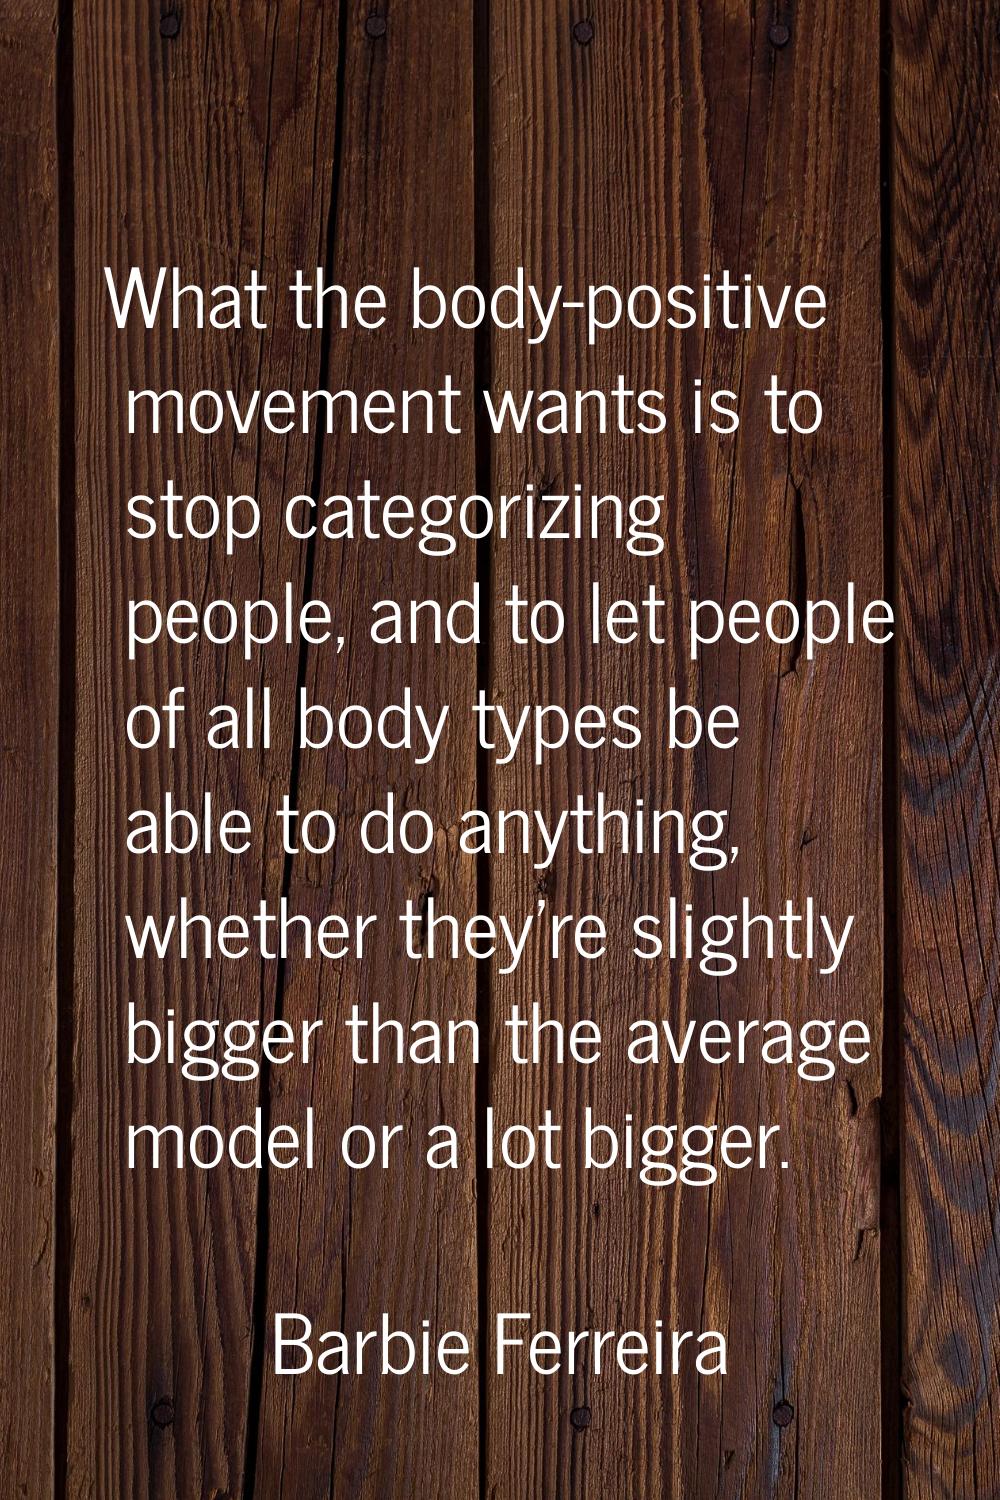 What the body-positive movement wants is to stop categorizing people, and to let people of all body